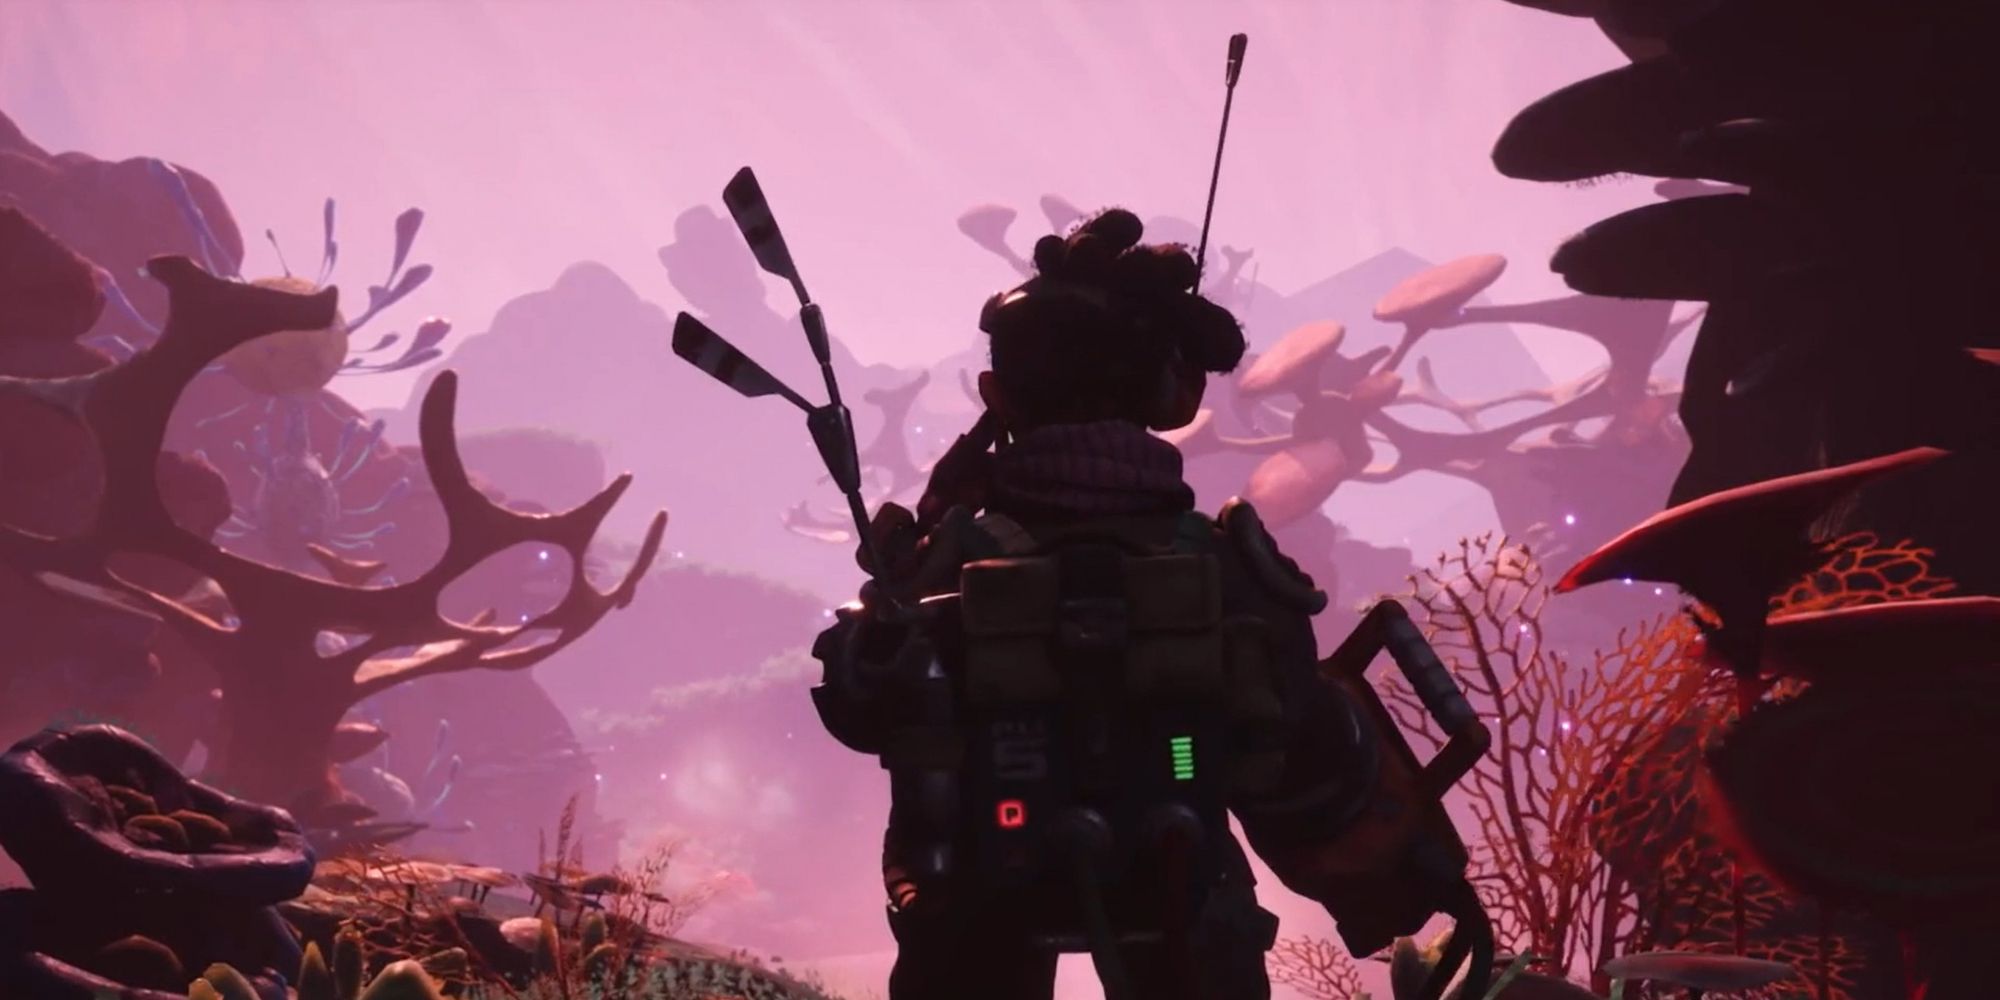 The protagonist with his back towards the viewer, facing an aliend landscape in the trailer for the game, The Gunk